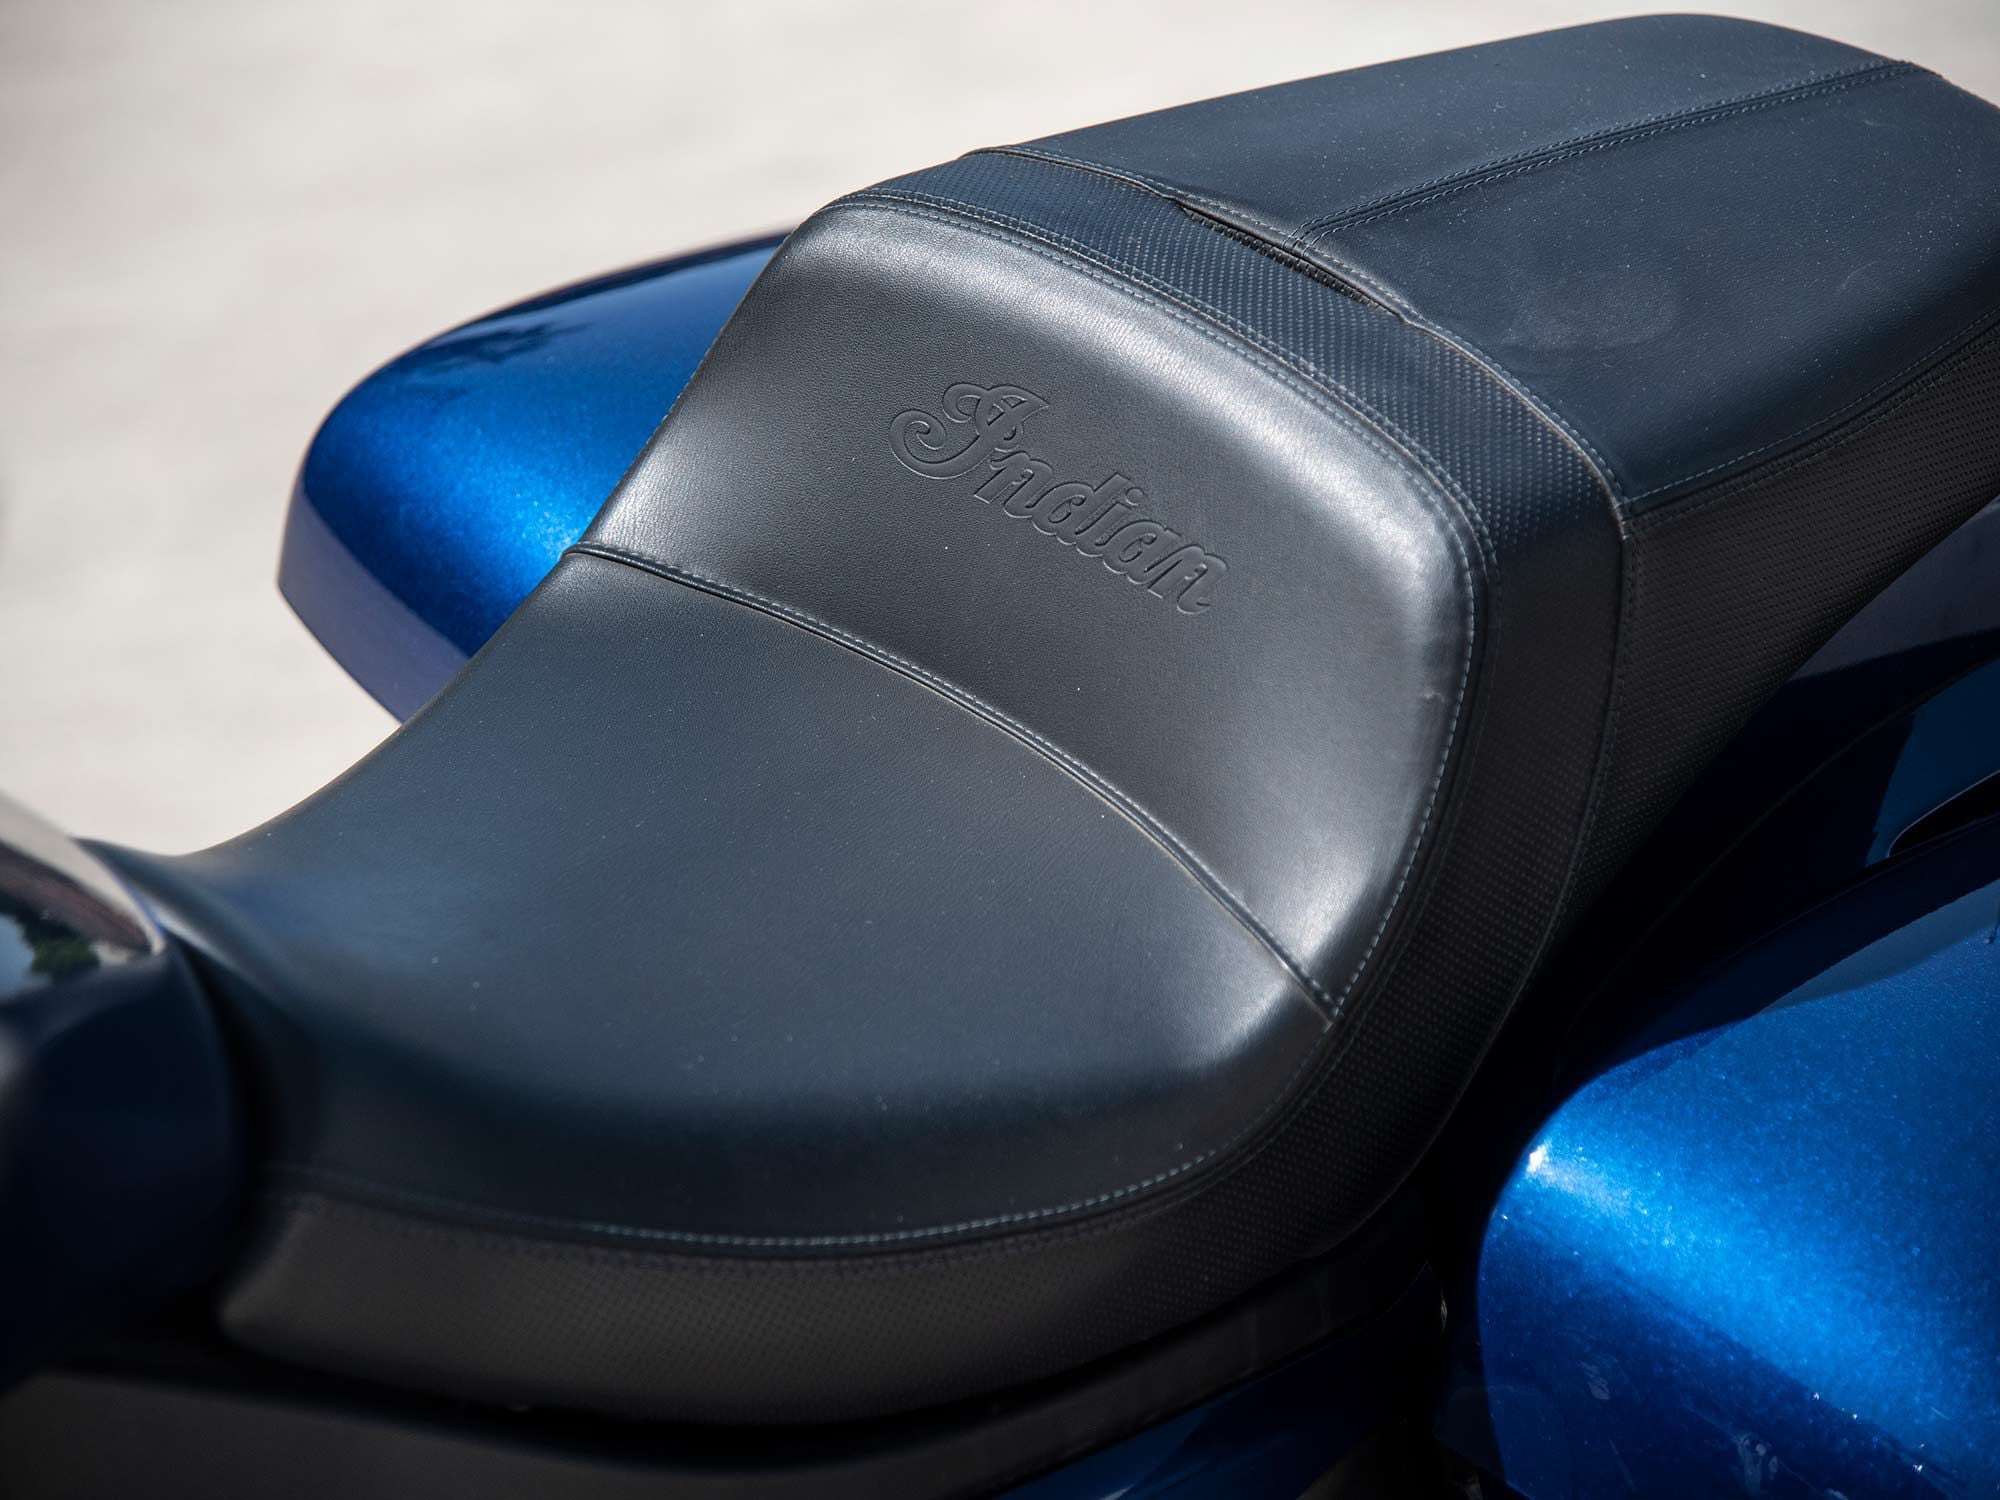 A generously sized saddle offers long-distance comfort.